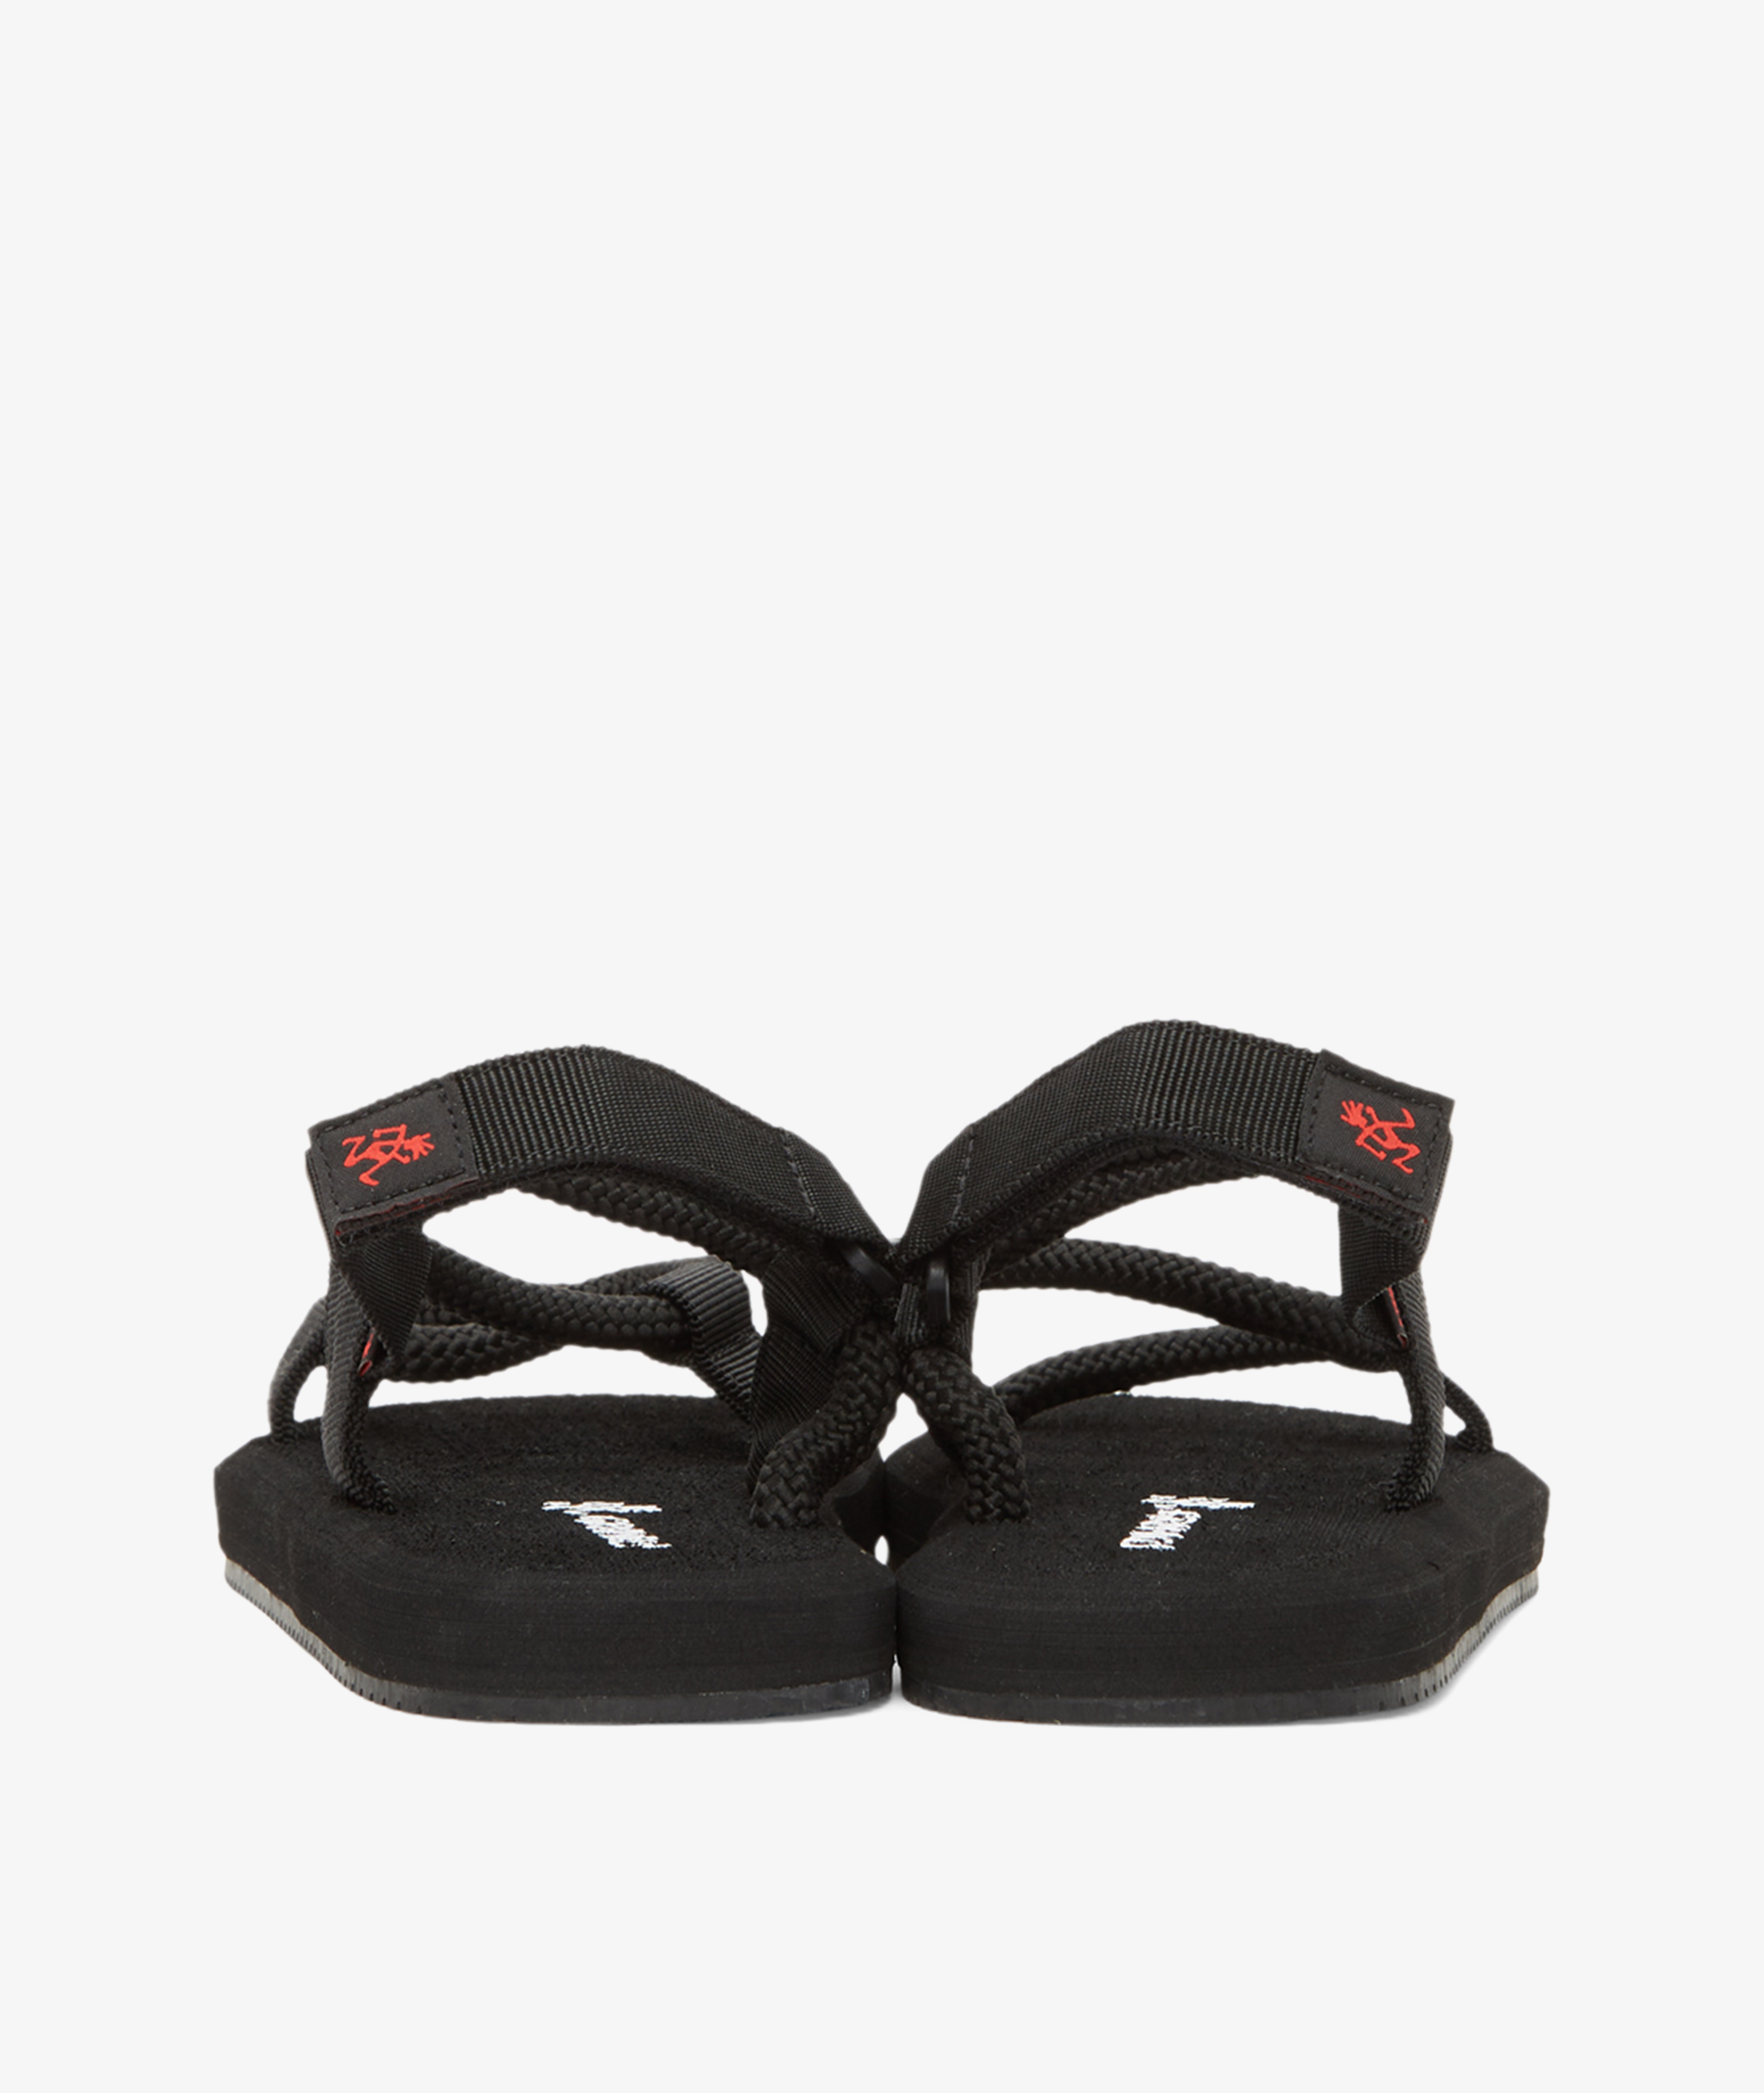 Norse Store | Shipping Worldwide - Gramicci ROPE SANDALS - Black